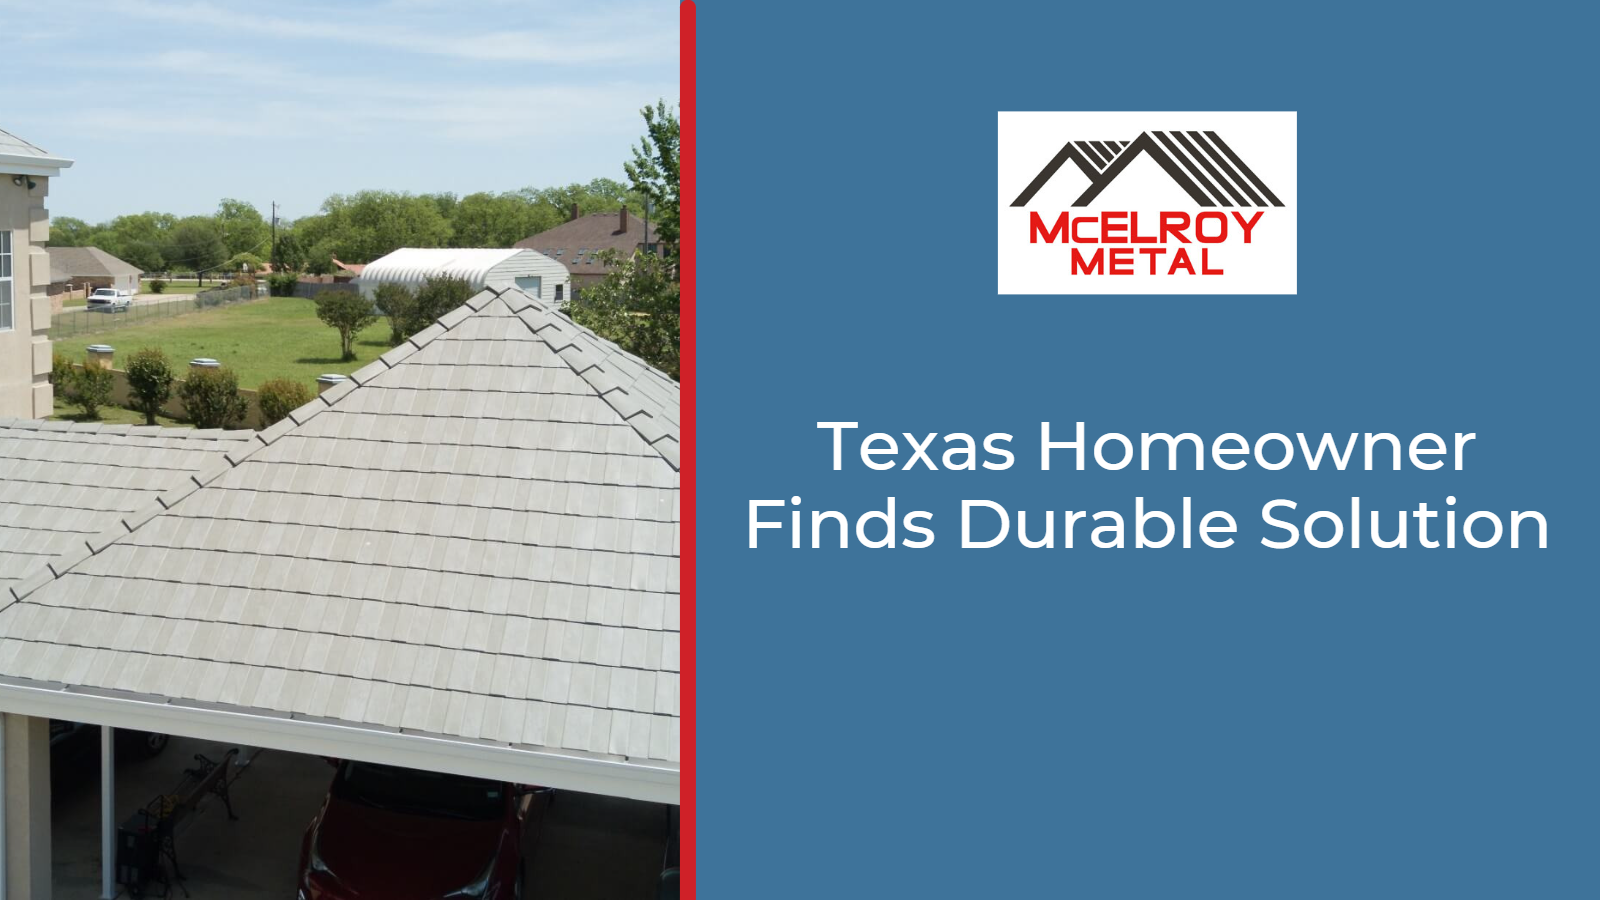 Texas Homeowner Finds Durable Solution